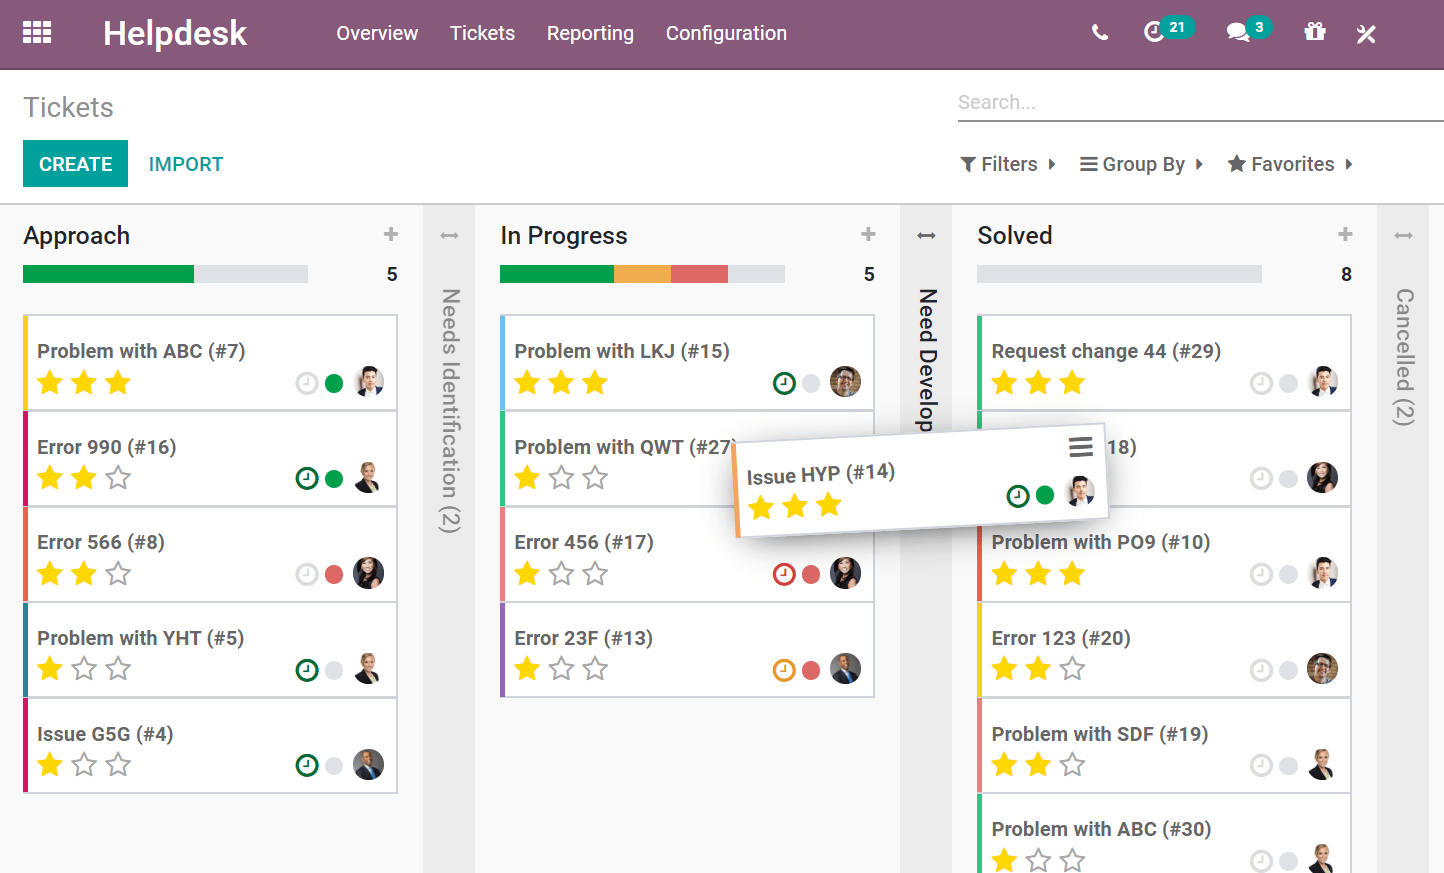 View of a team’s kanban view in CoquiAPPs Helpdesk